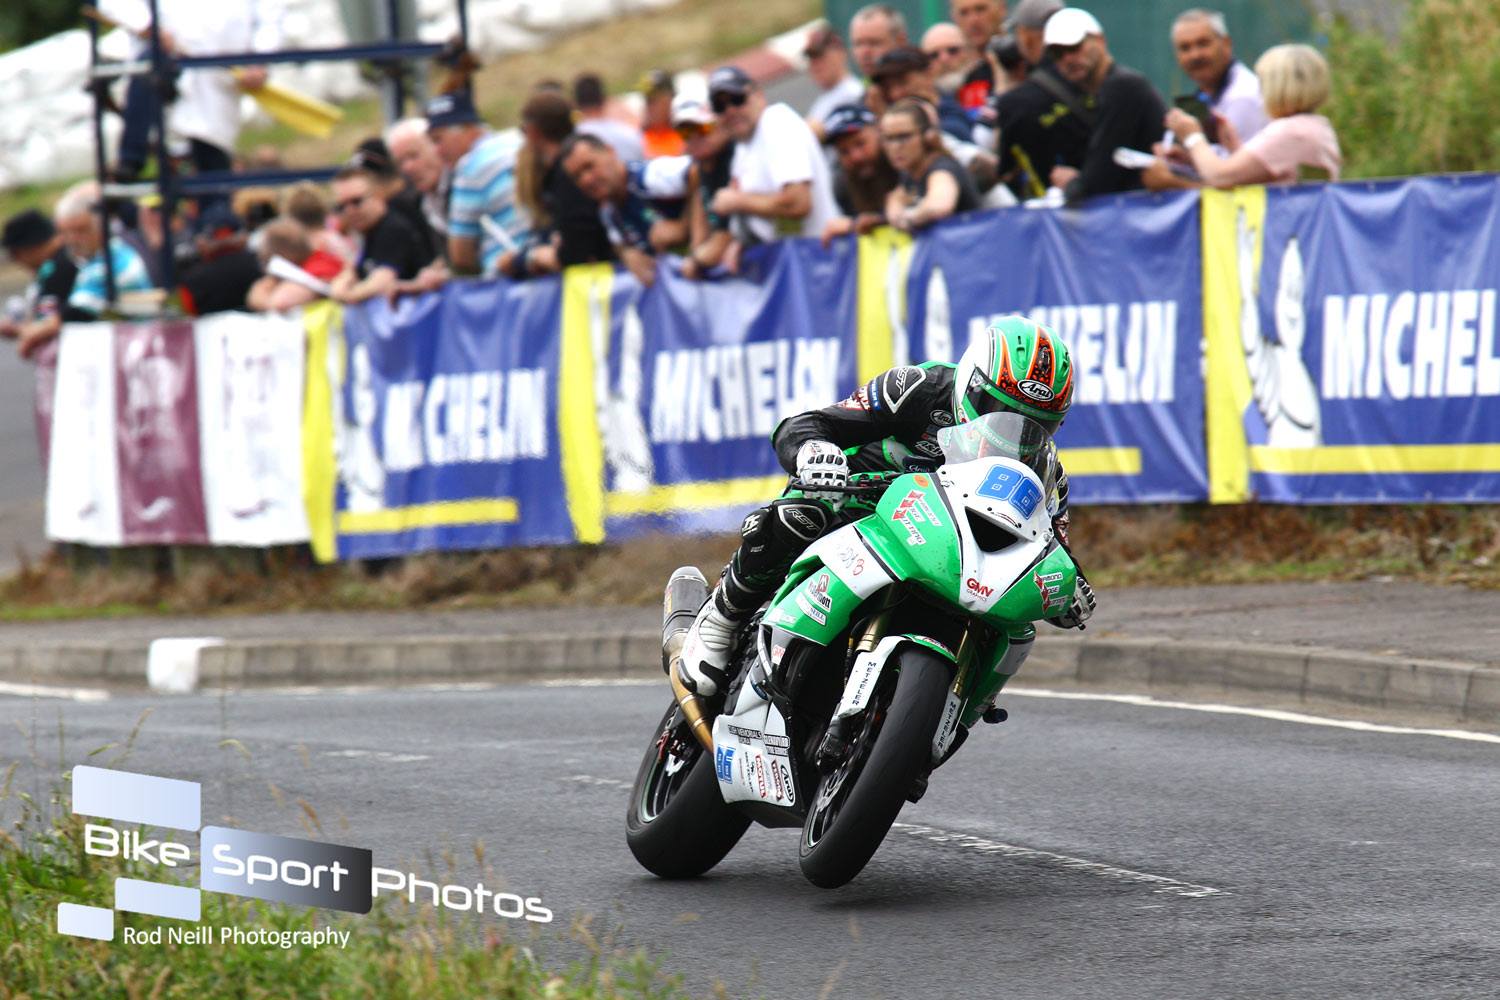 Armoy: Ultra Consistent McGee Scores Tilesplus Kia Supersport Victory